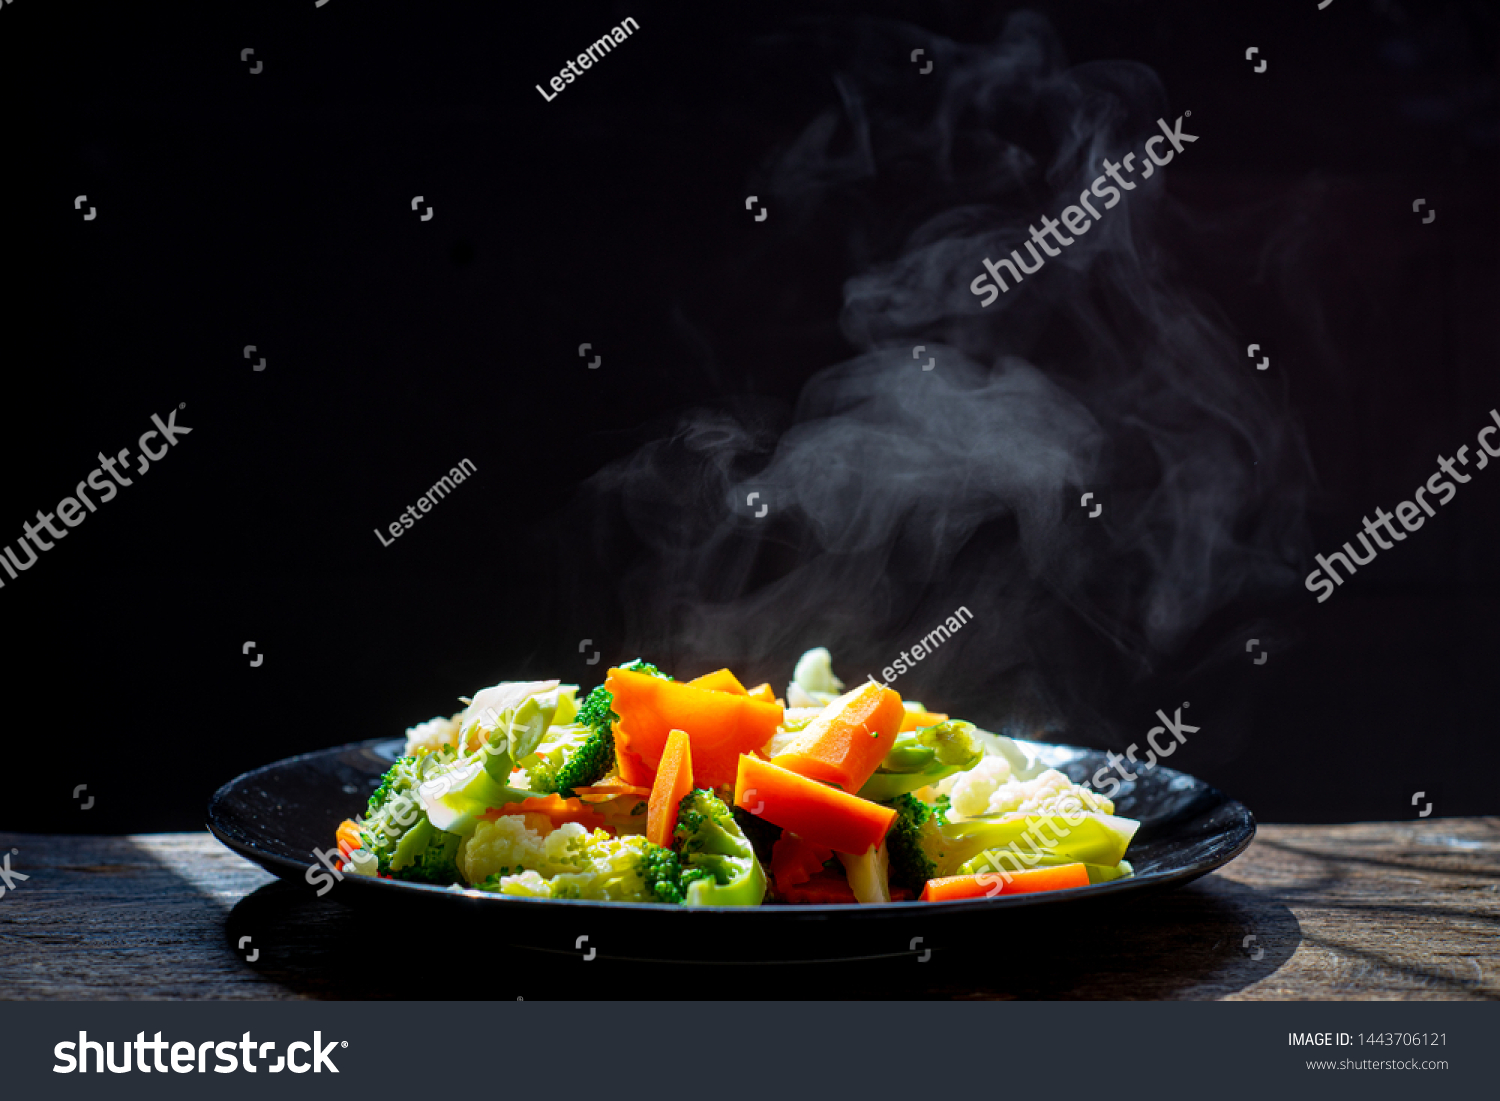 The steam from the vegetables carrot broccoli Cauliflower in a black plate  , a steaming. Boiled hot Healthy food on table on black background,hot food and healthy meal concept #1443706121